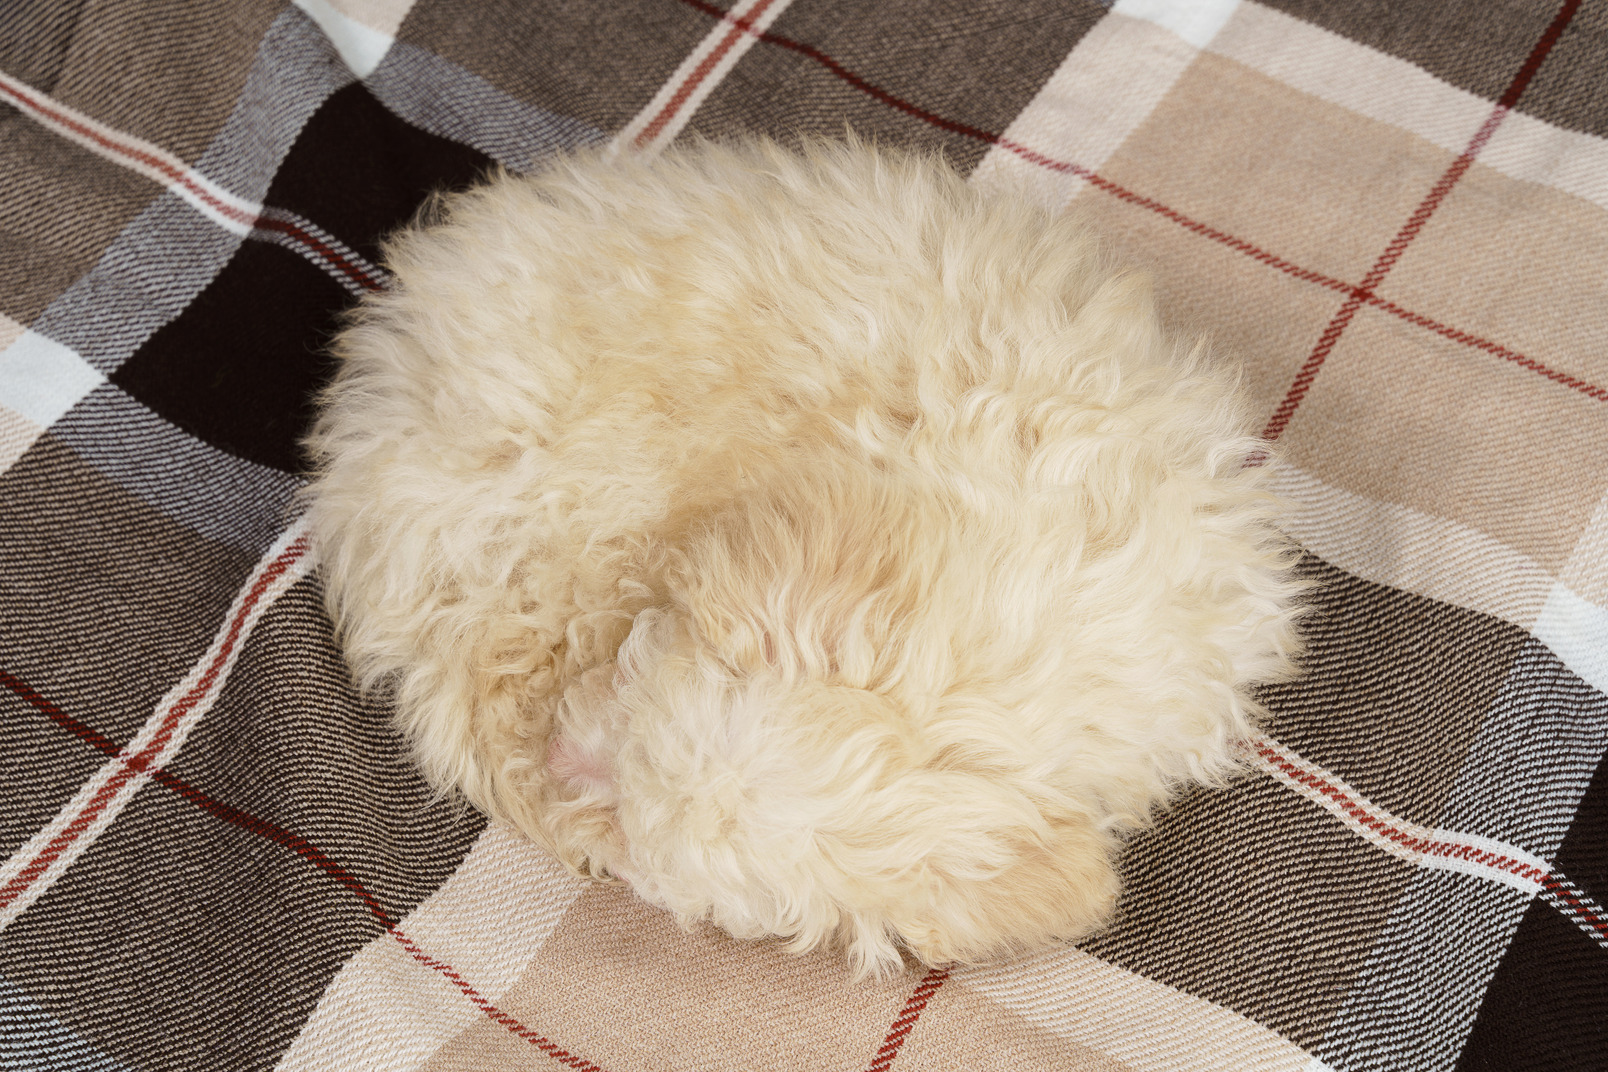 Full-length of a tiny puppy sleeping on a checked blanket